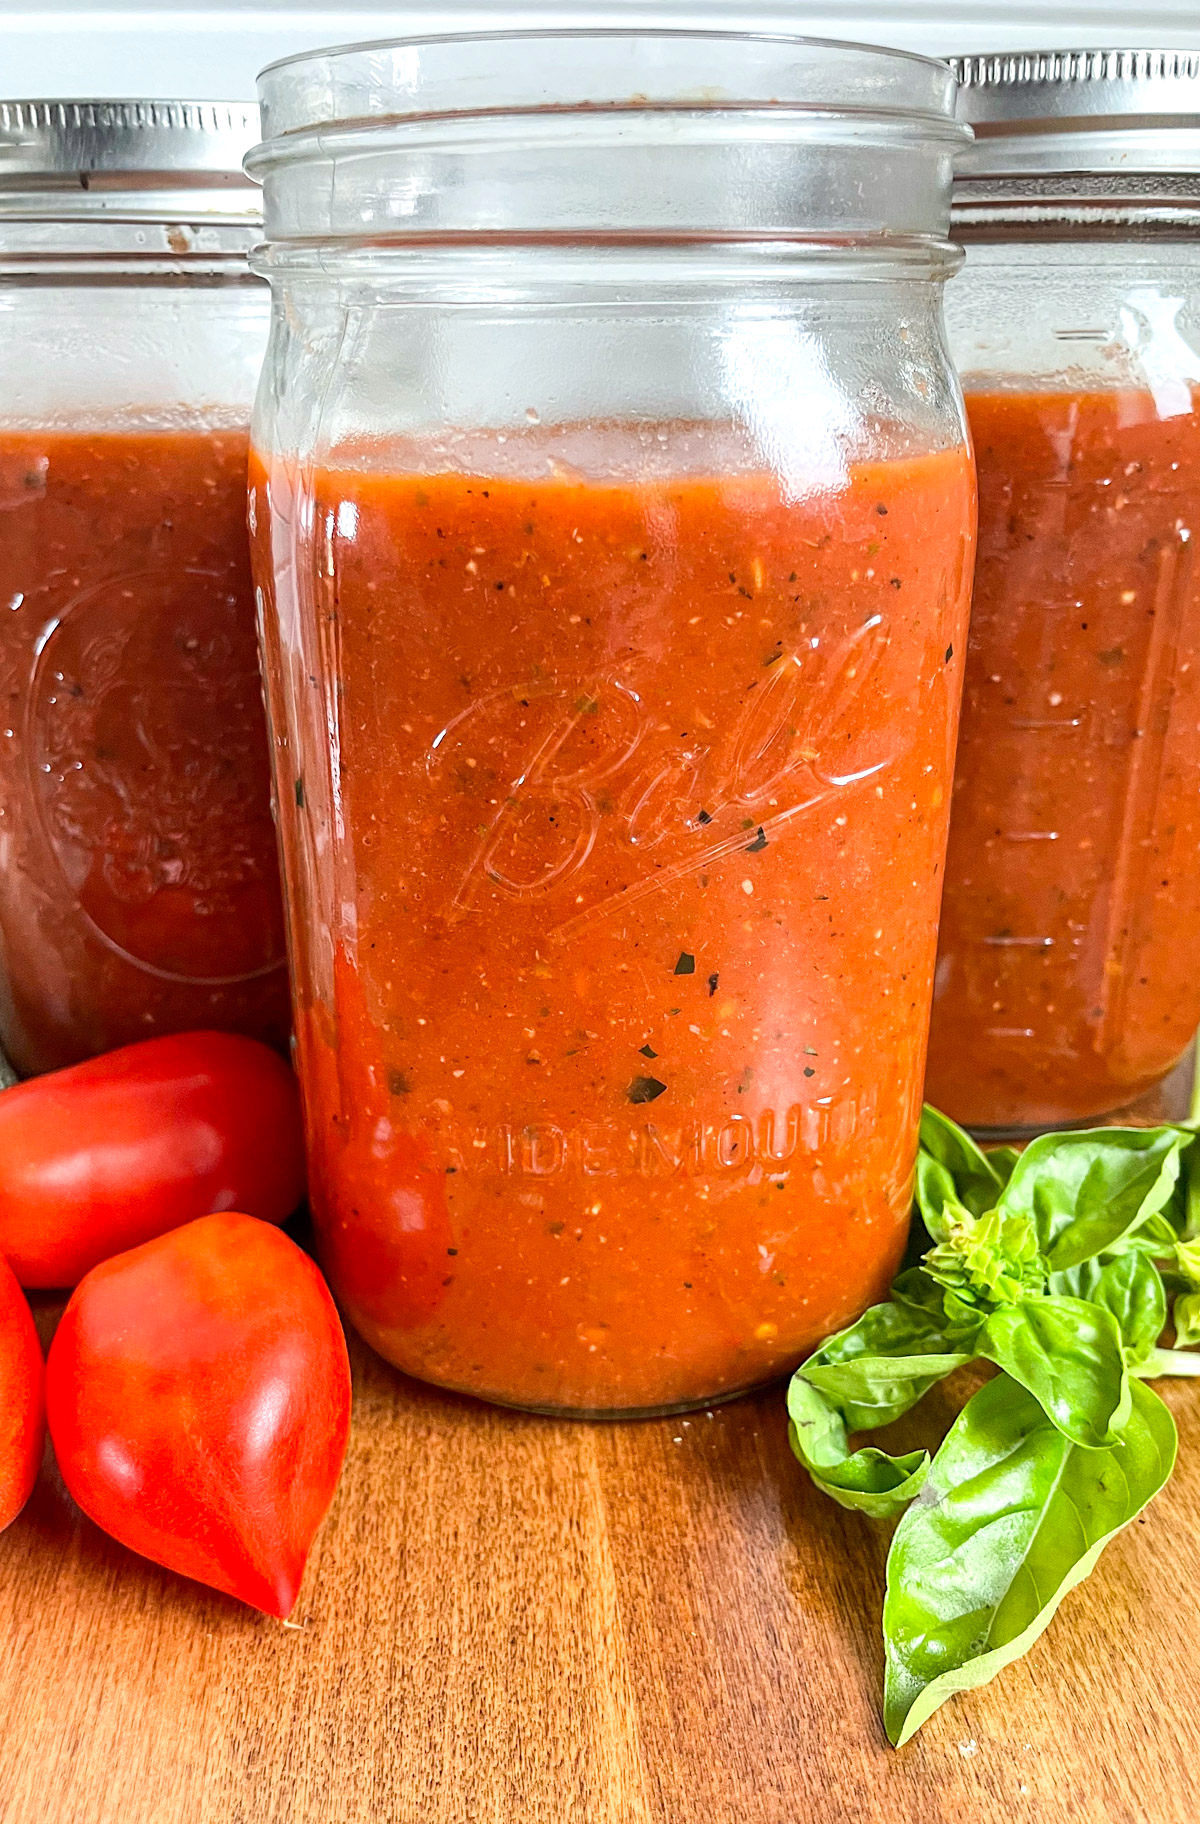 jars of roasted tomato sauce with fresh tomatoes and basil